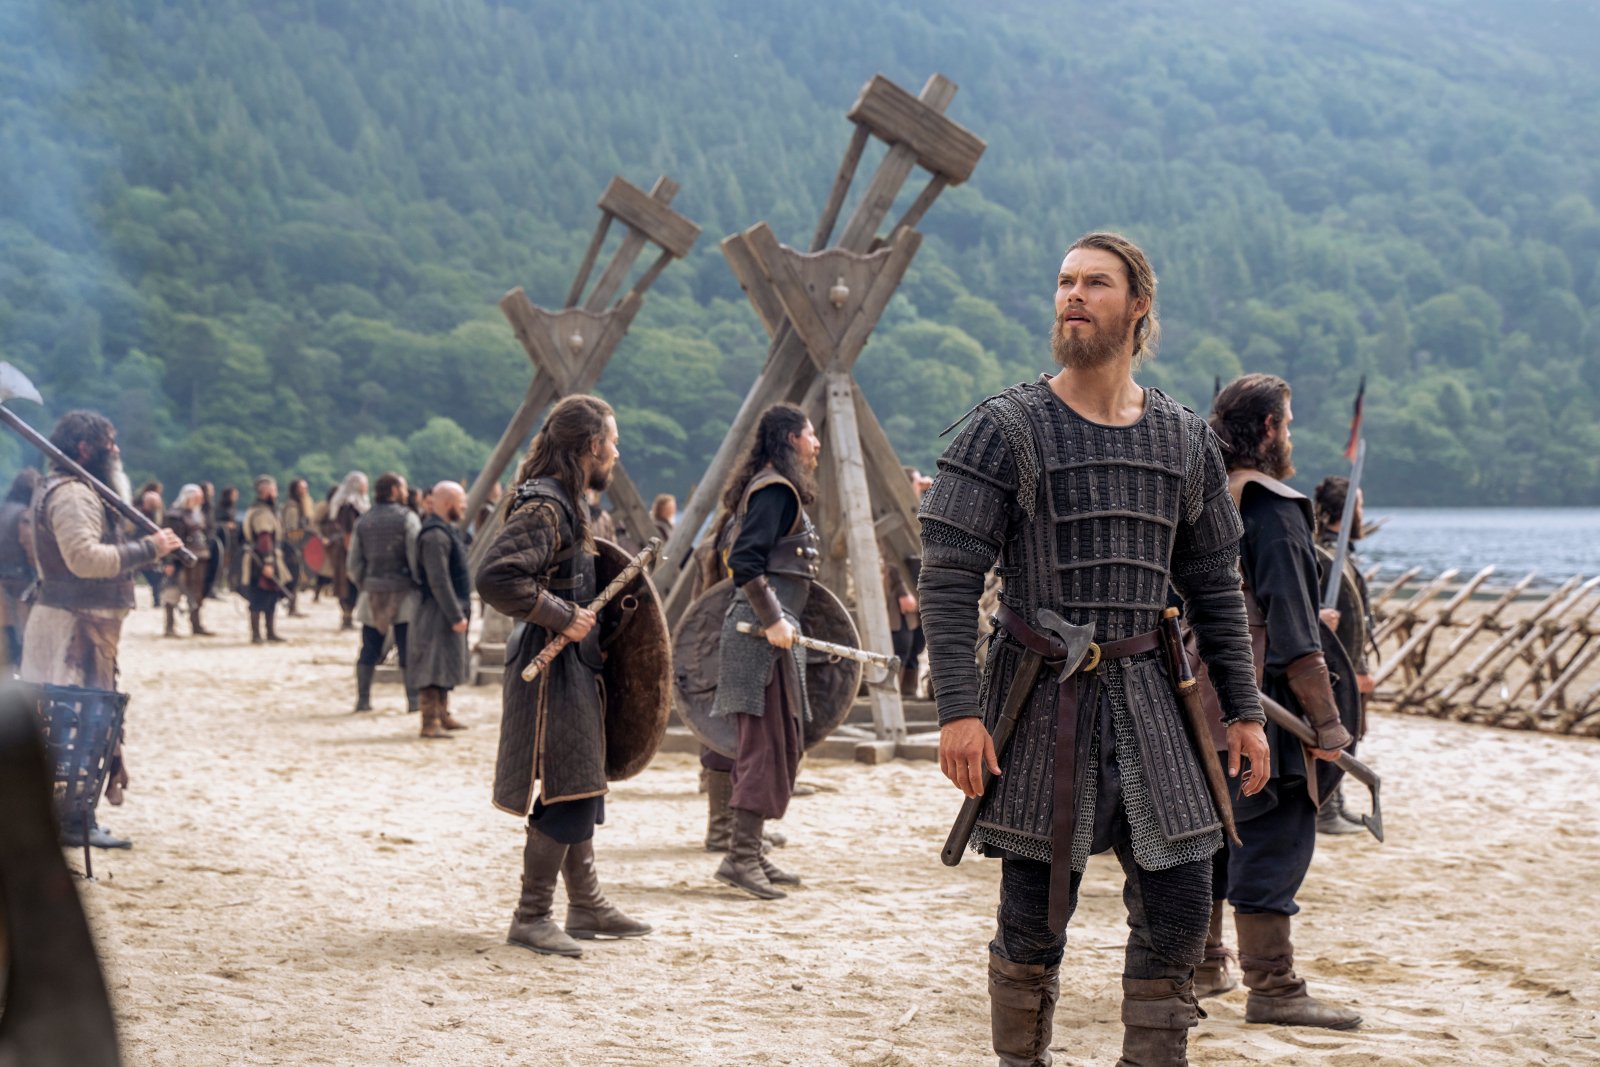 Sam Corlett as Leif Eriksson in 'Vikings: Valhalla' Season 1 for our recap of the first outing. He's looking up at something, and there are men and ships behind him.